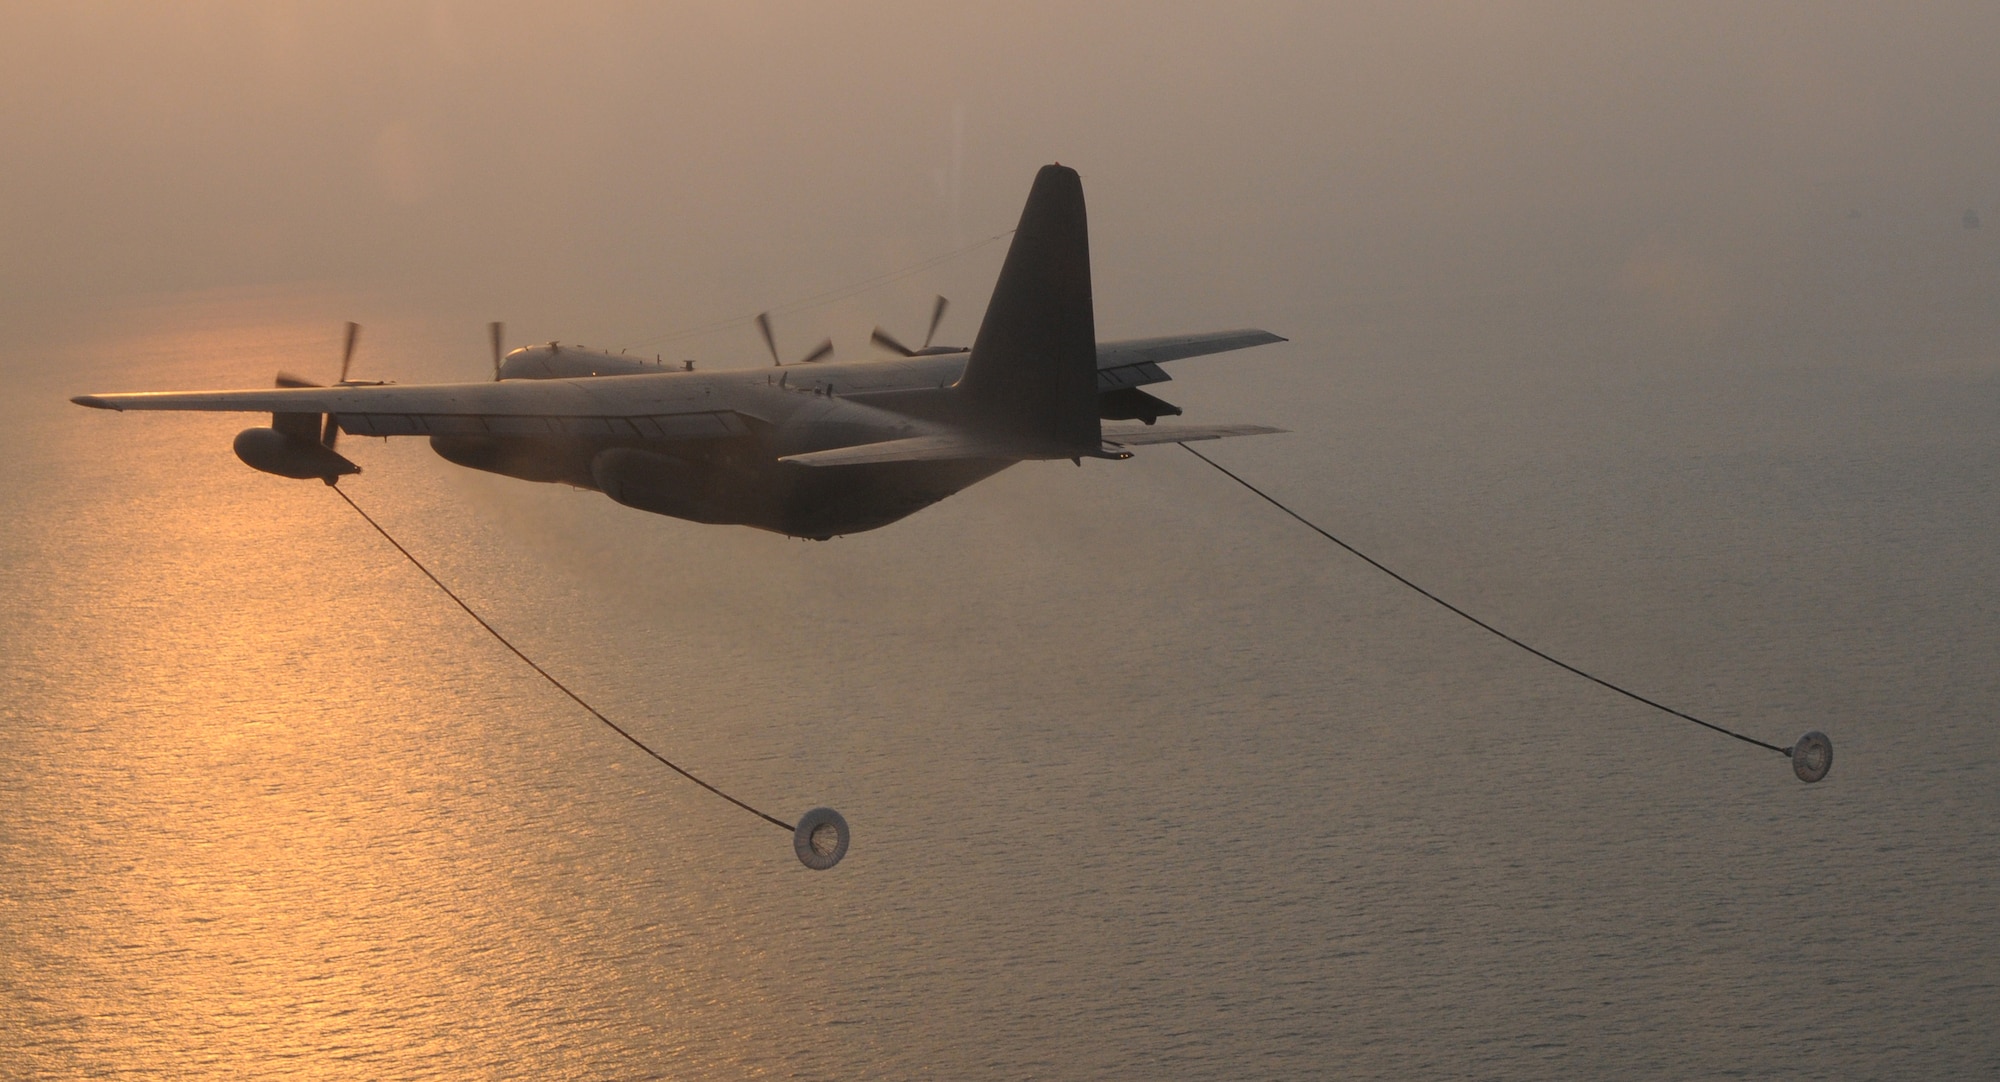 OVER THE REPUBLIC OF KOREA -- A MC-130P Combat Shadow from the 17th Special Operations Squadron releases its hoses and drogue refueling pods to refuel a U.S. Army MH-47 helicopter from the 160th Special Operations Aviation Regiment (Airborne) during a training mission here March 30 during Foal Eagle 2009.  Foal Eagle is an annual combined training exercise for U.S. and Republic of Korea forces to evaluate and improve their ability to coordinate procedures, plans and systems necessary to defend the ROK. The 17th SOS is deployed from Kadena Air Base, Japan, and the 160th SOAR is deployed from Fort Lewis, Wash. (U.S. Air Force photo by Tech. Sgt. Aaron Cram)